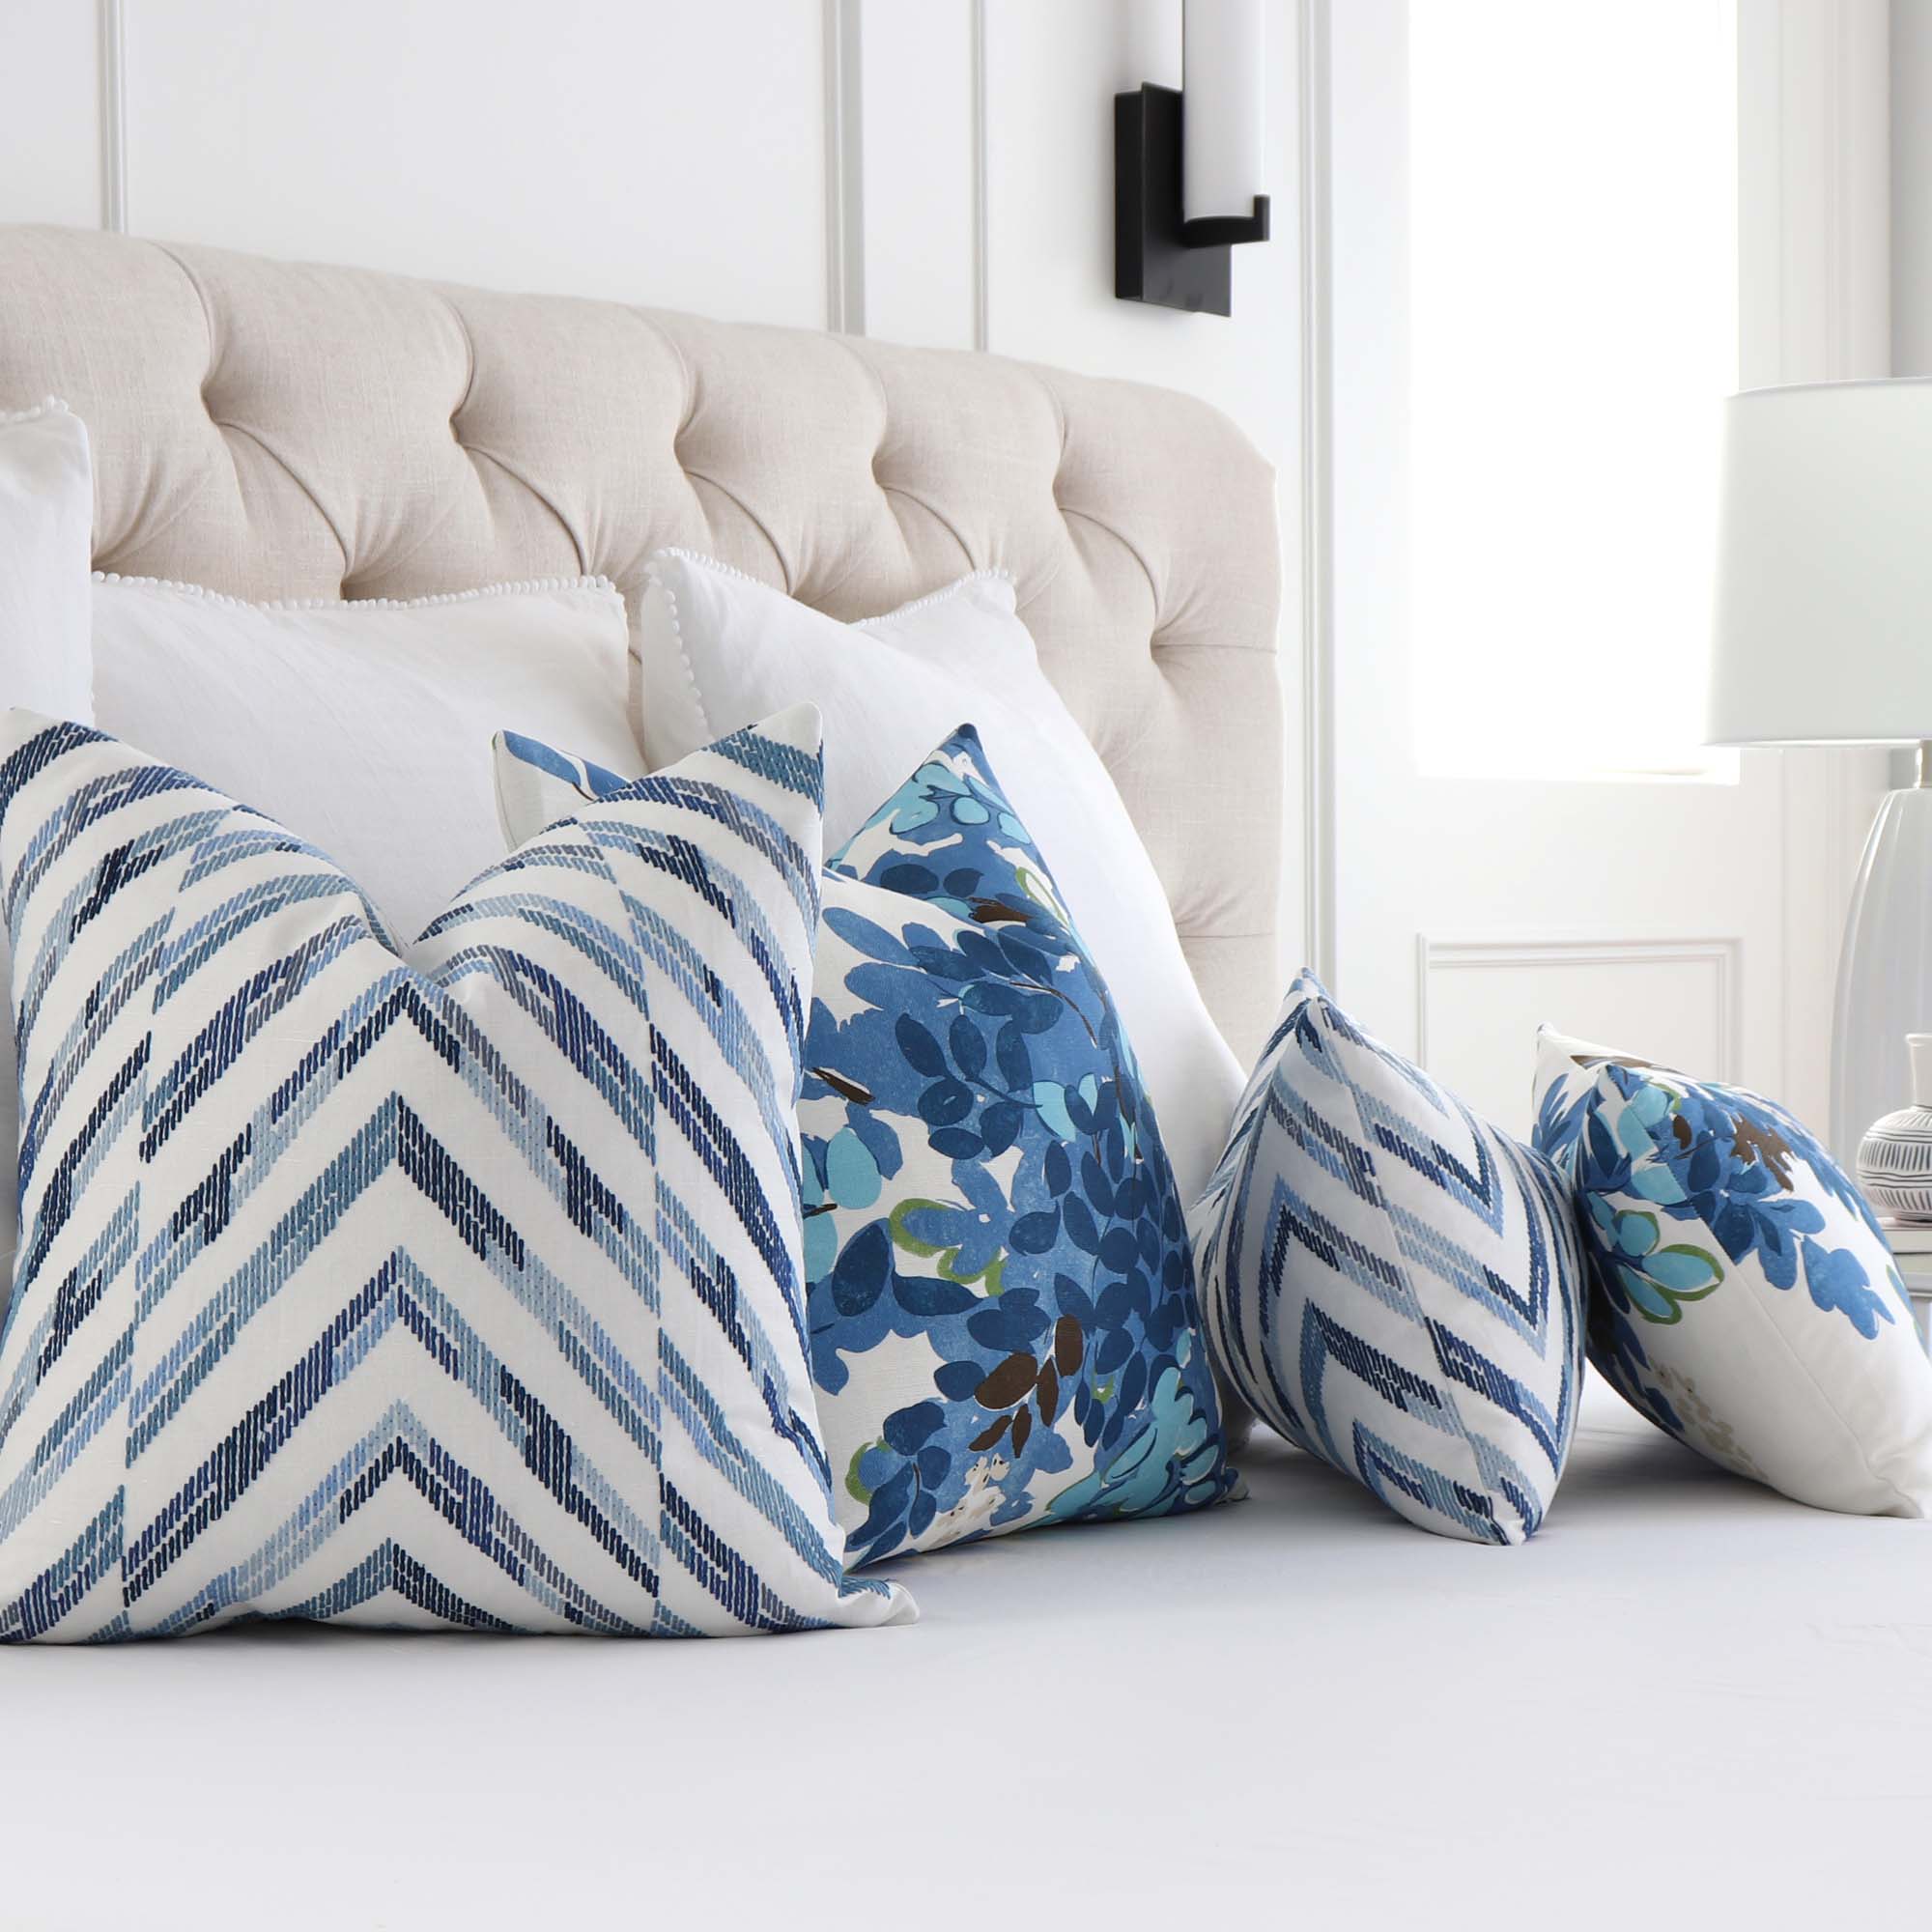 https://www.chloeandolive.com/cdn/shop/products/Thibaut-Hamilton-Embroidery-Blue-White-W714346-Chevron-Geometric-Designer-Luxury-Throw-Pillow-Cover-in-Bedroom-with-Matching-Pillows_5000x.jpg?v=1627666487